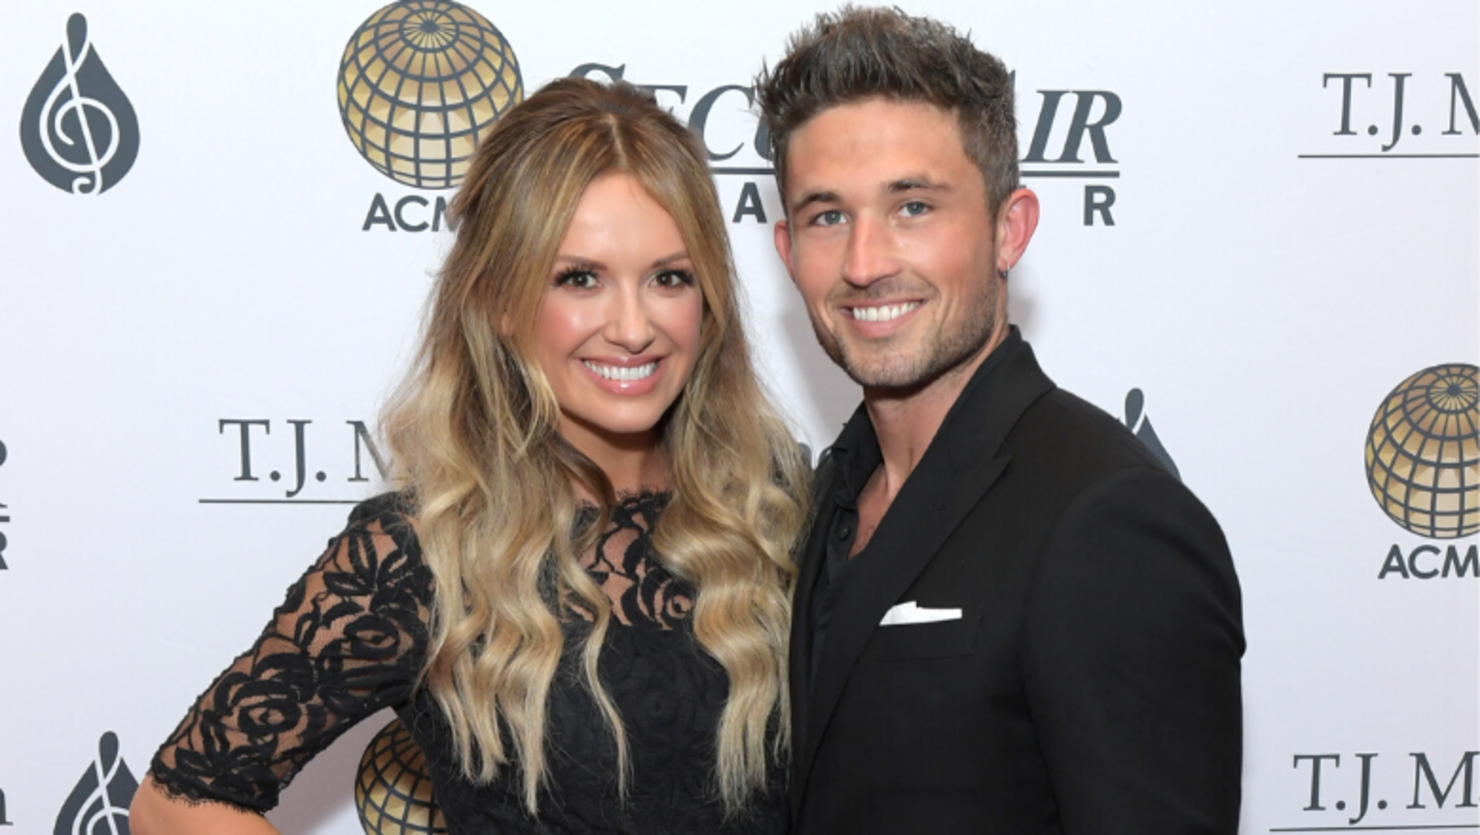 Carly Pearce And Michael Ray's Current Obsession Is 'Tiger King'